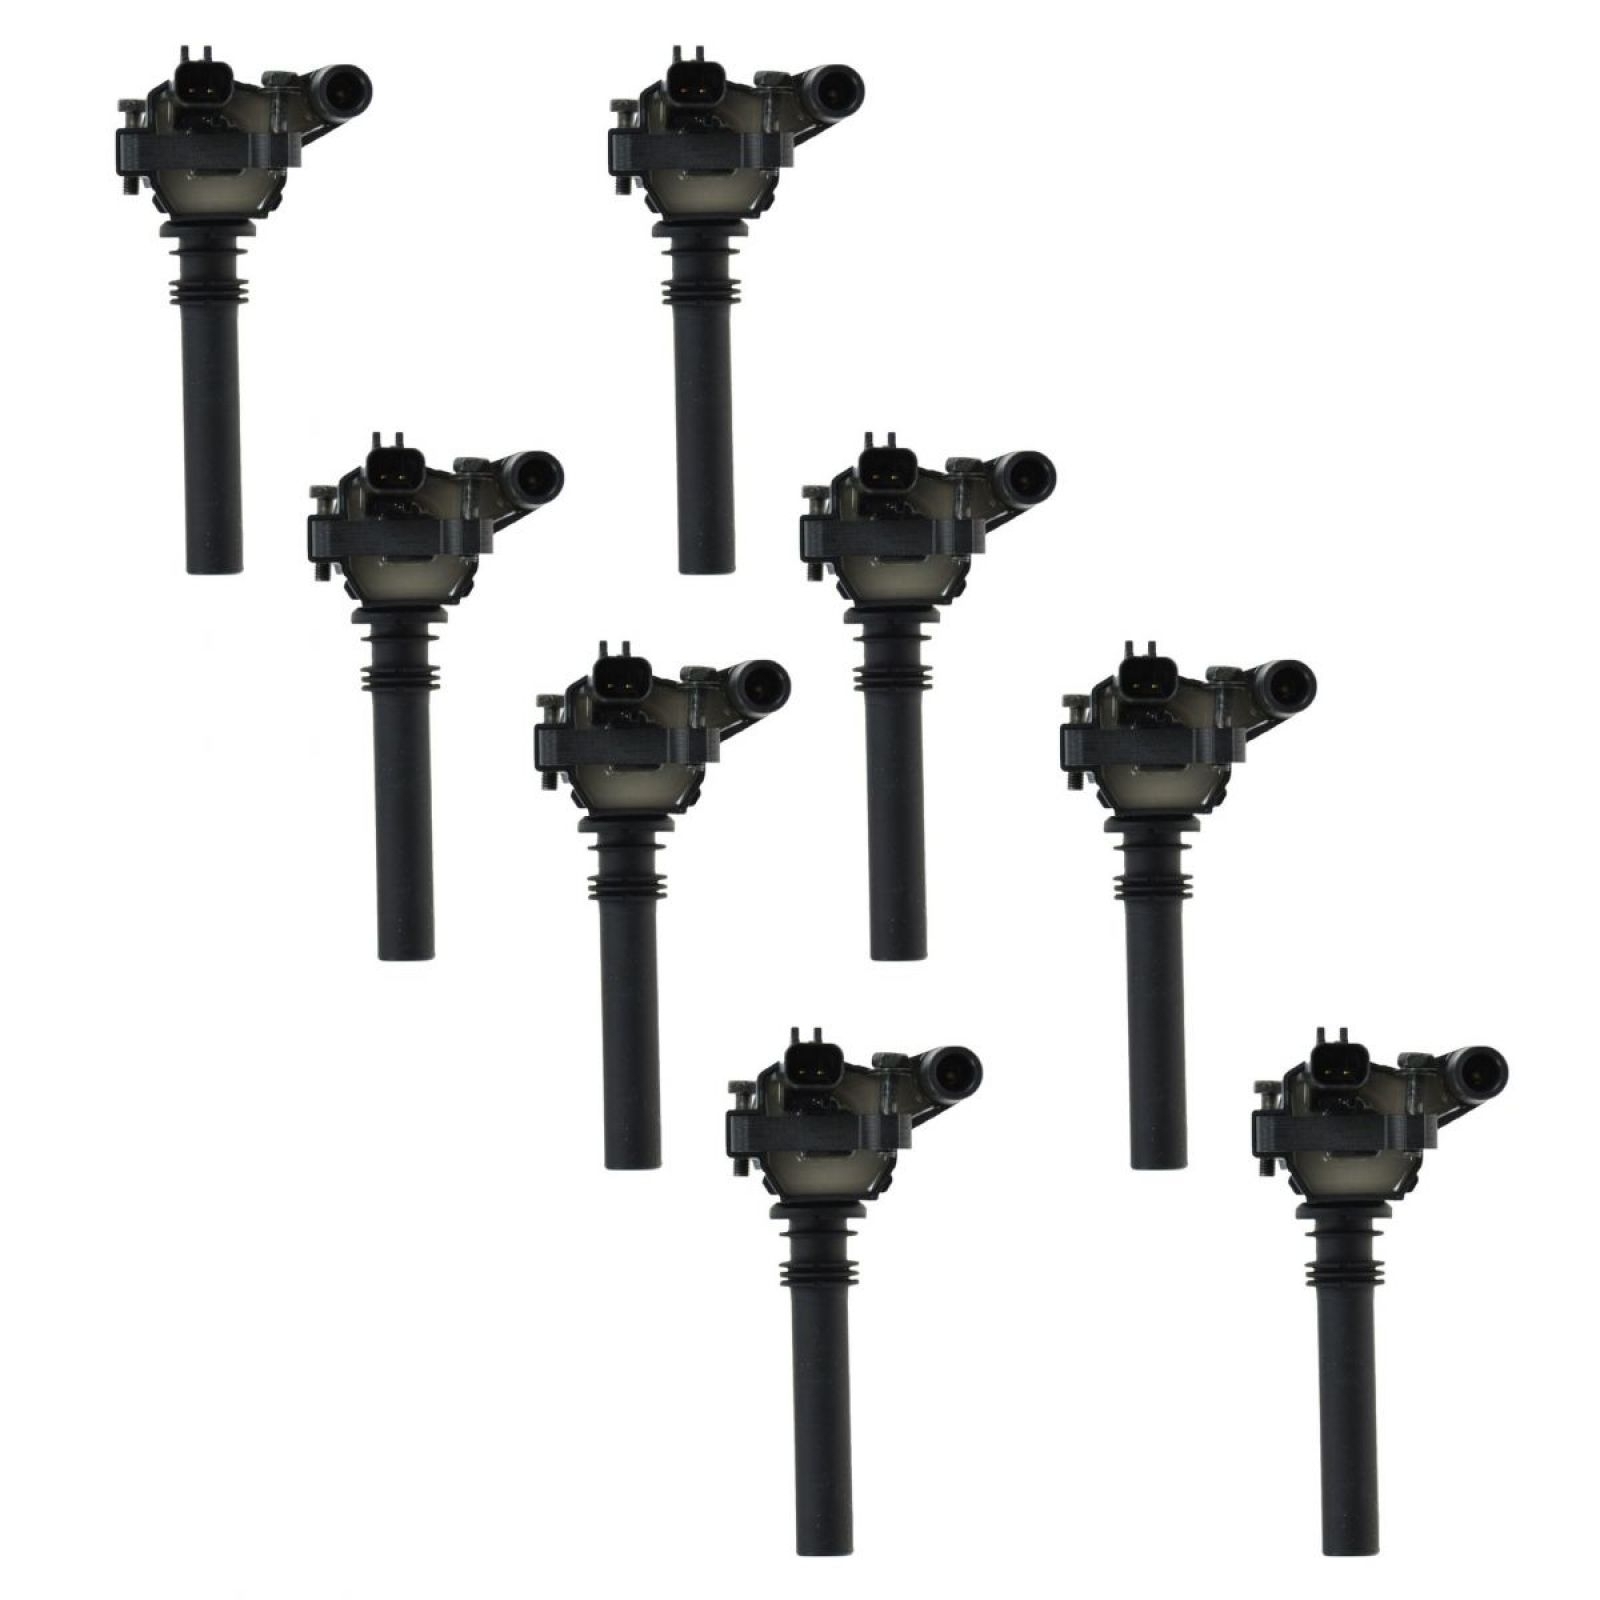 Trq 8 Piece Ignition Coil Set For 05 Grand Cherokee, HWNV-ICA61431